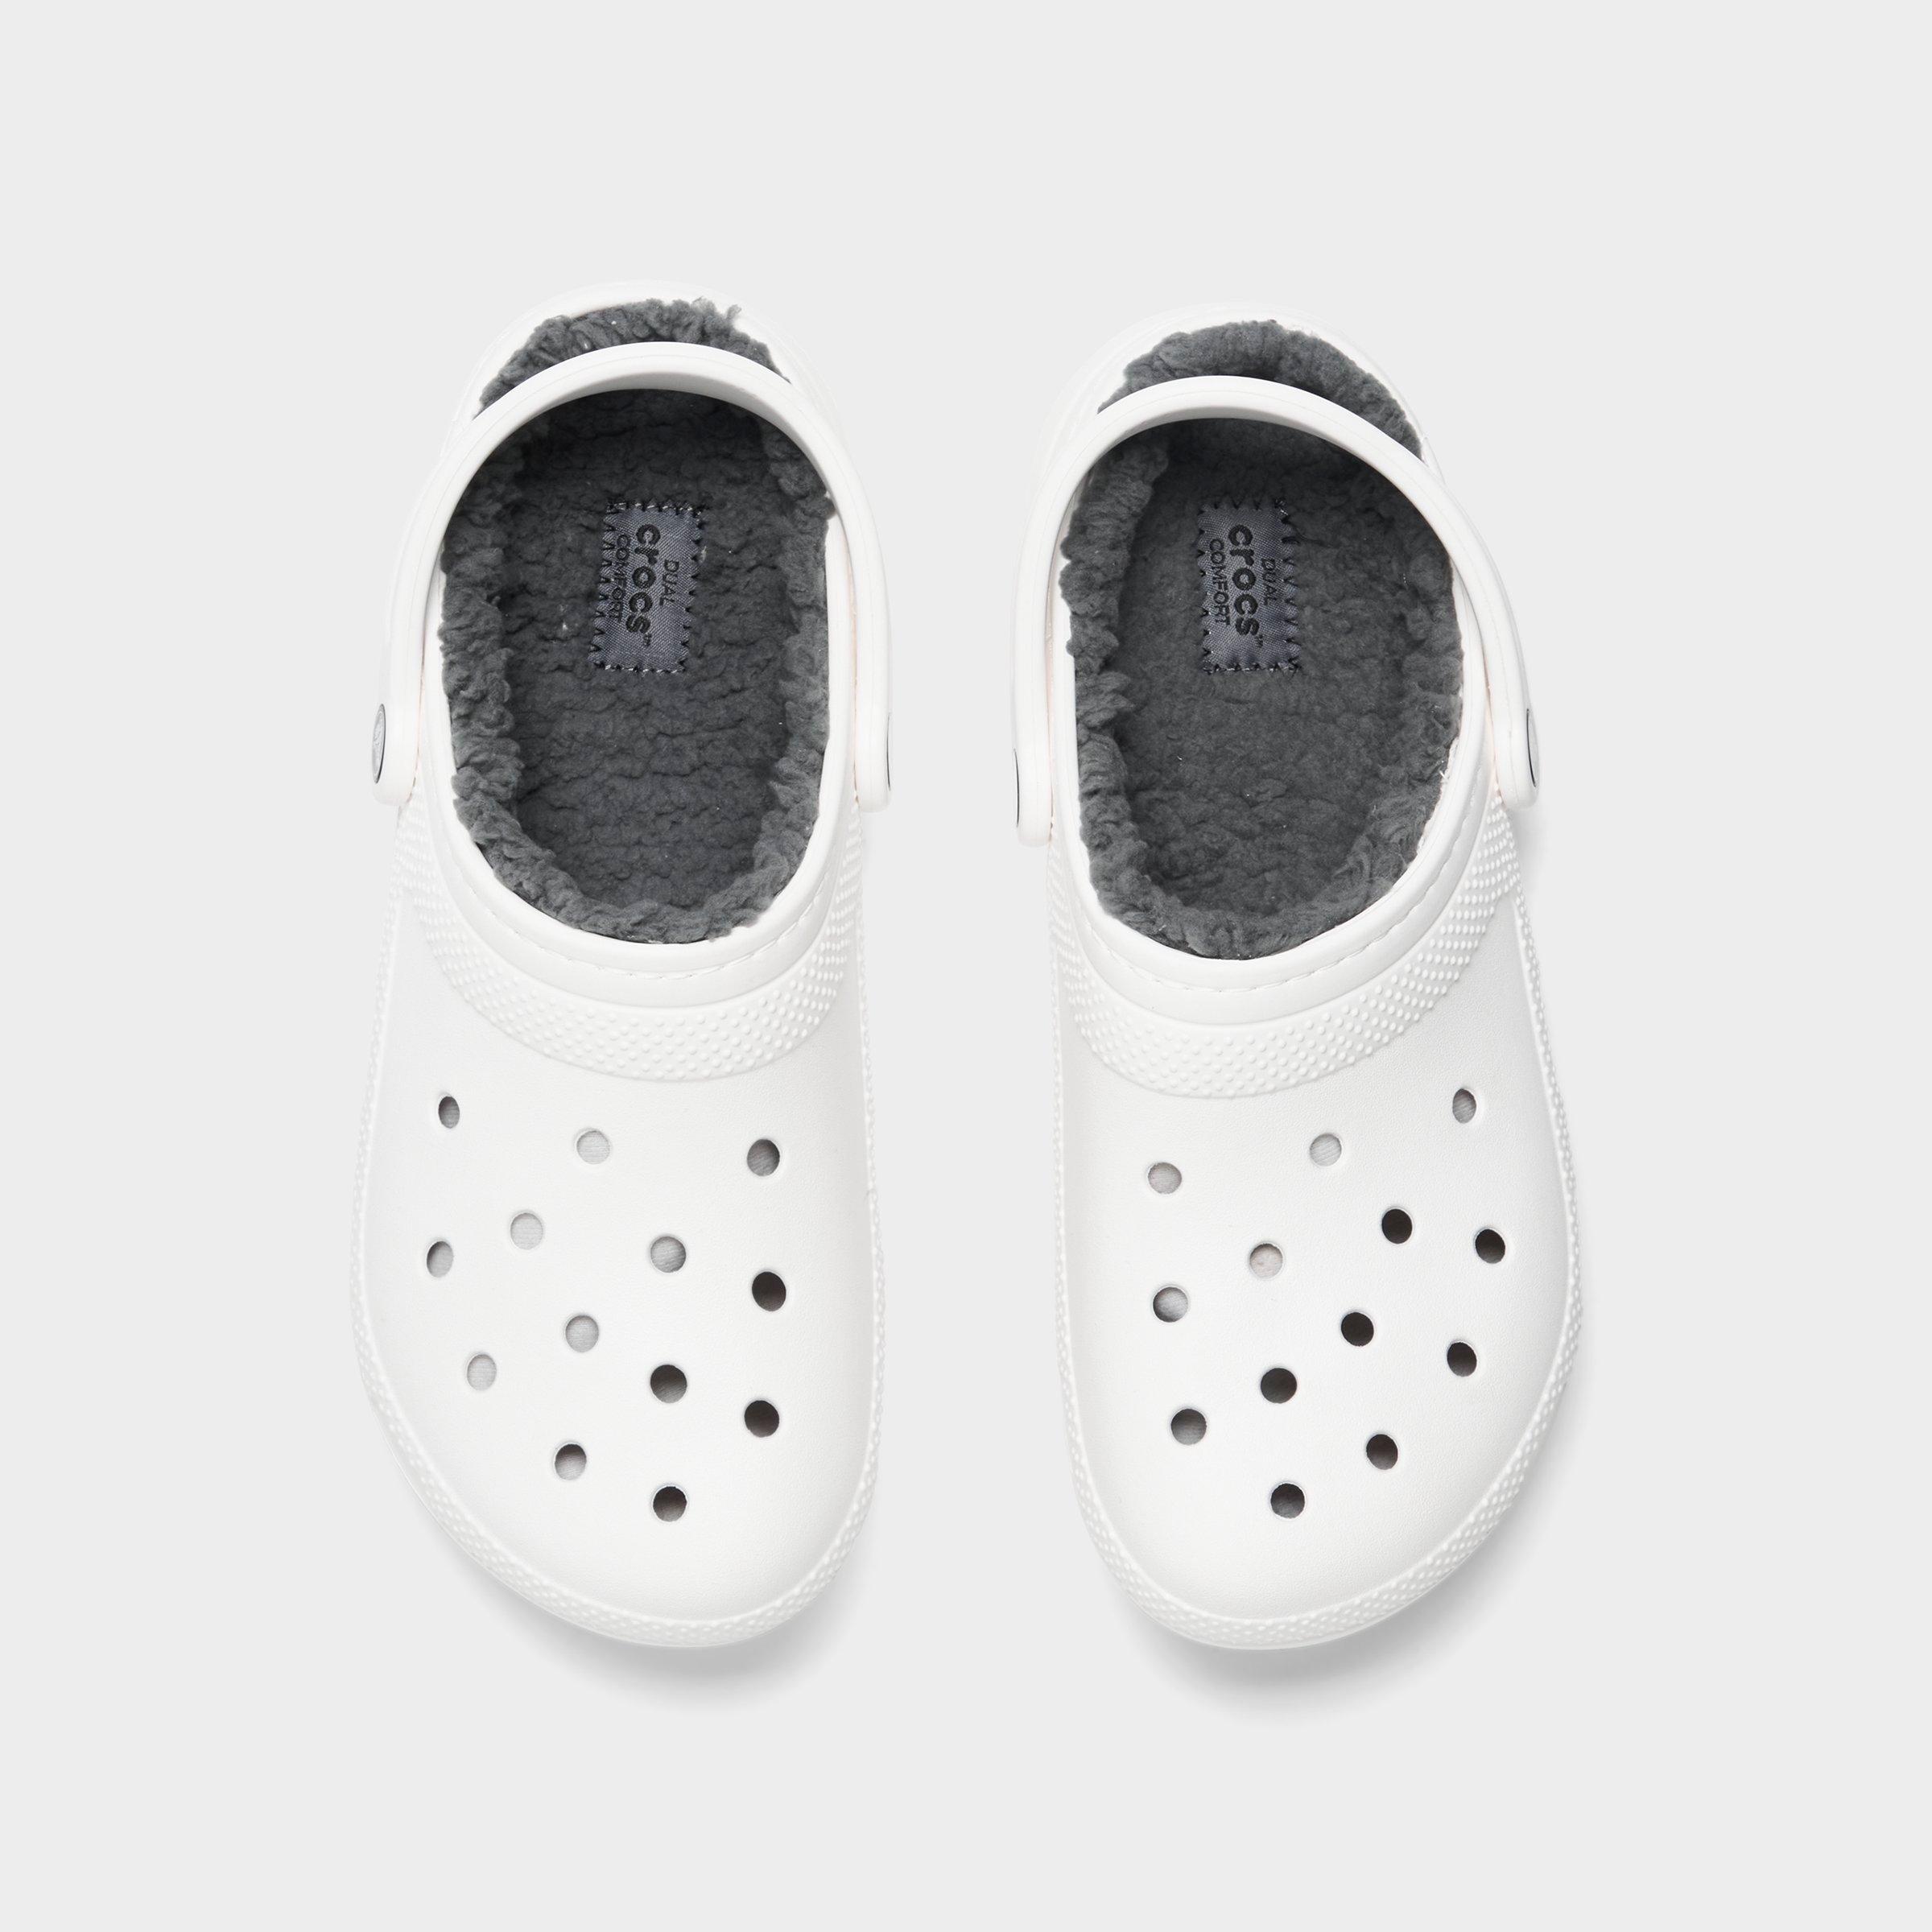 white lined crocs